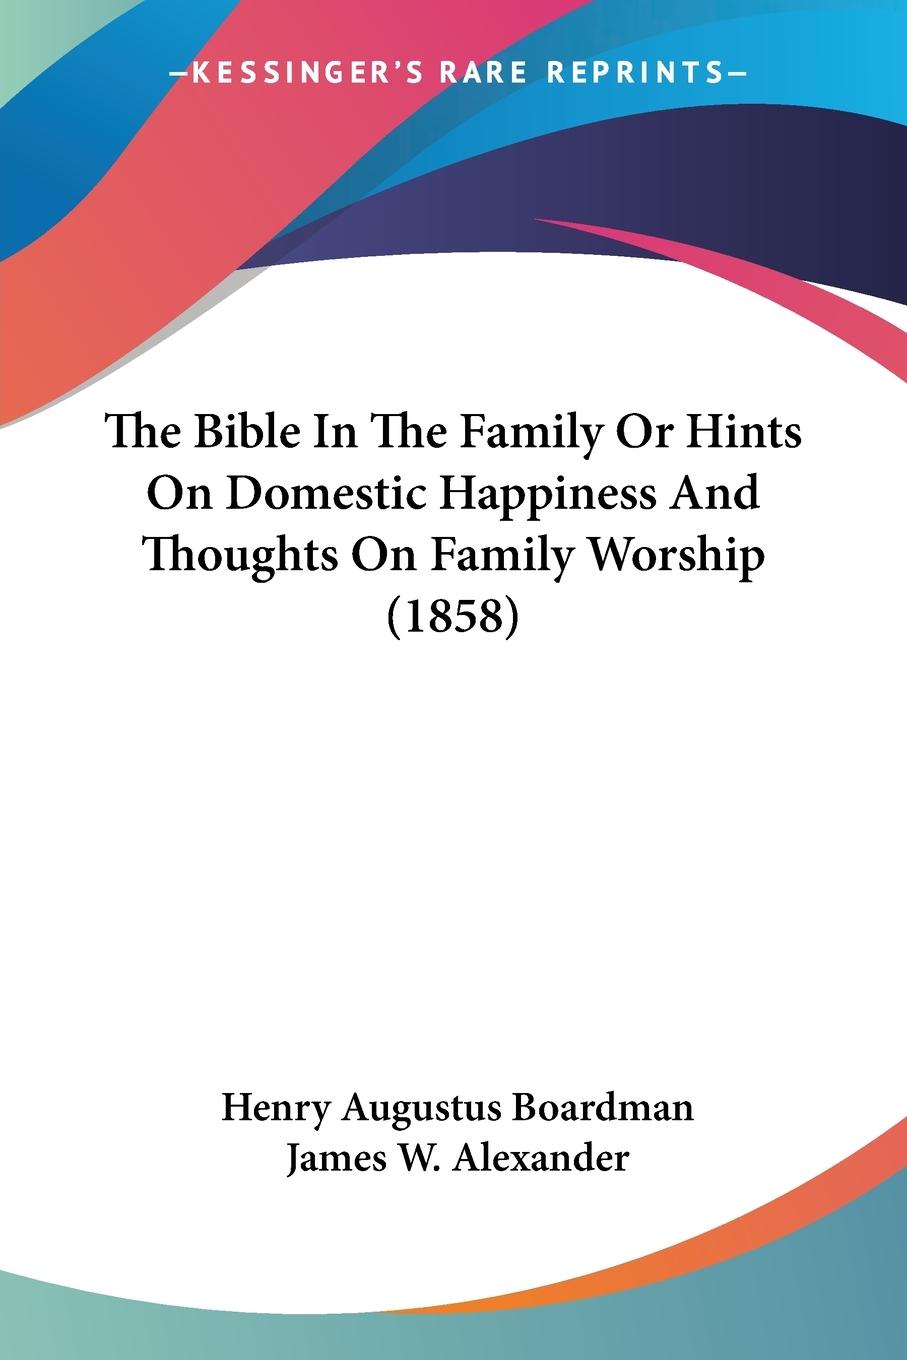 The Bible In The Family Or Hints On Domestic Happiness And Thoughts On Family Worship (1858) - Boardman, Henry Augustus Alexander, James W.